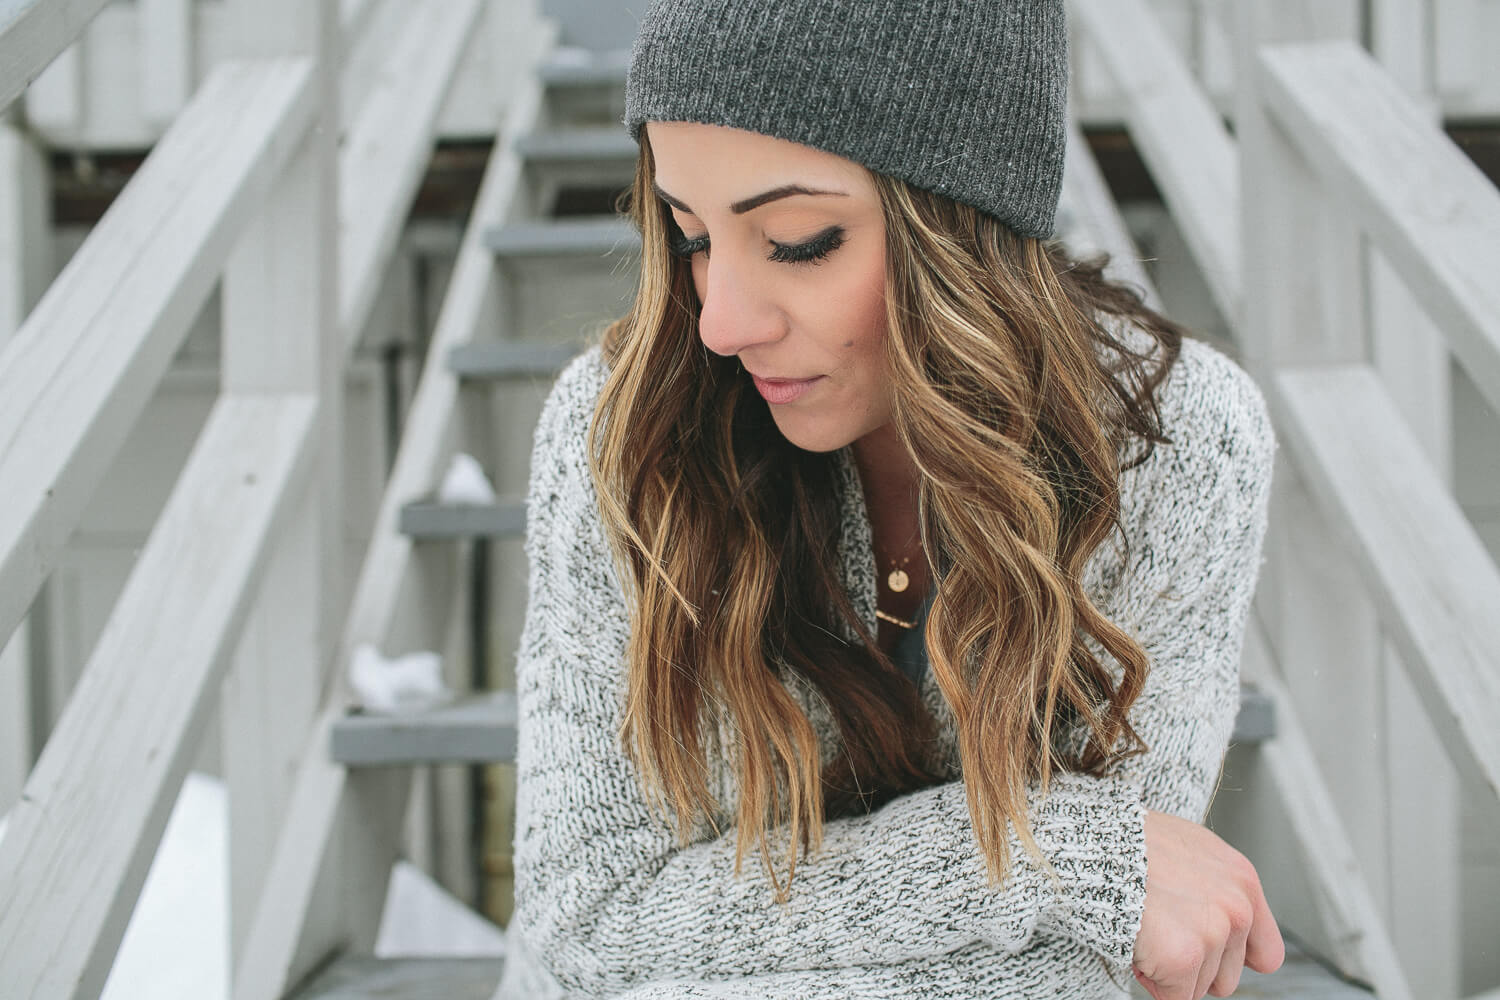 Styling Cozy Outfits From Vuori - Lauren McBride